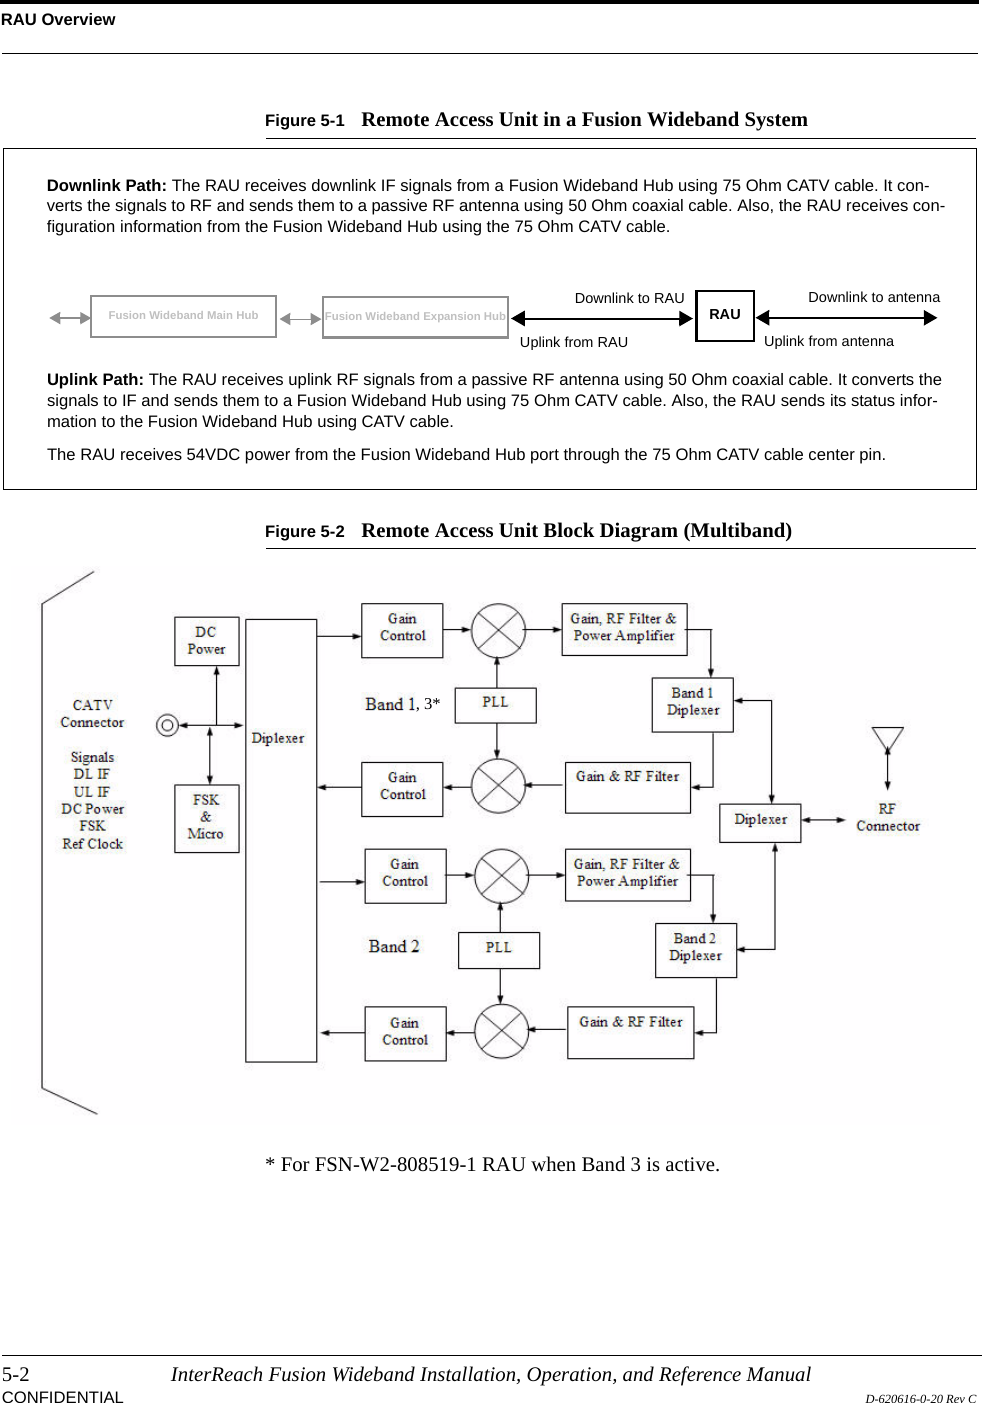 RAU Overview5-2 InterReach Fusion Wideband Installation, Operation, and Reference ManualCONFIDENTIAL D-620616-0-20 Rev CFigure 5-1 Remote Access Unit in a Fusion Wideband SystemFigure 5-2 Remote Access Unit Block Diagram (Multiband)* For FSN-W2-808519-1 RAU when Band 3 is active.Fusion Wideband Expansion Hub RAUDownlink Path: The RAU receives downlink IF signals from a Fusion Wideband Hub using 75 Ohm CATV cable. It con-verts the signals to RF and sends them to a passive RF antenna using 50 Ohm coaxial cable. Also, the RAU receives con-figuration information from the Fusion Wideband Hub using the 75 Ohm CATV cable.Uplink Path: The RAU receives uplink RF signals from a passive RF antenna using 50 Ohm coaxial cable. It converts the signals to IF and sends them to a Fusion Wideband Hub using 75 Ohm CATV cable. Also, the RAU sends its status infor-mation to the Fusion Wideband Hub using CATV cable.The RAU receives 54VDC power from the Fusion Wideband Hub port through the 75 Ohm CATV cable center pin.Downlink to RAUUplink from RAUFusion Wideband Main HubDownlink to antennaUplink from antenna, 3*